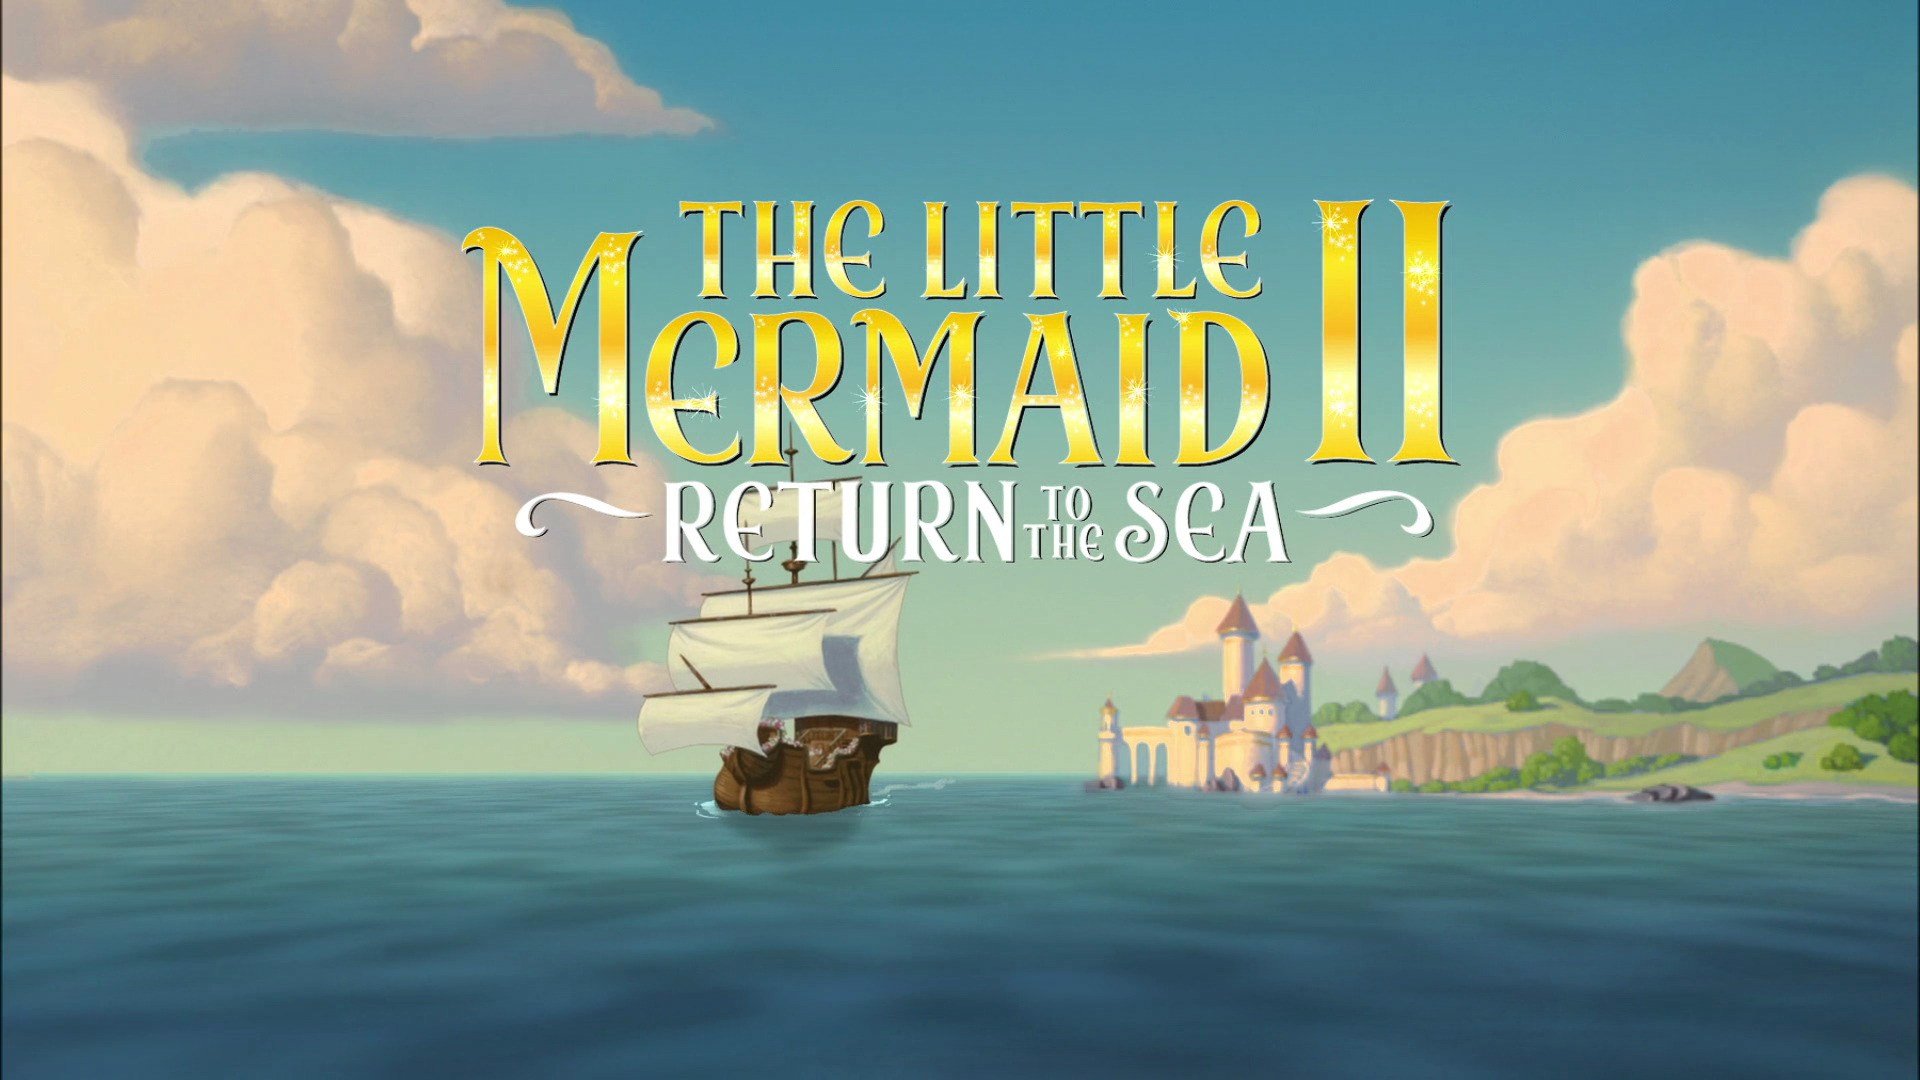 The Little Mermaid 2: Return to the Sea. Film and Television